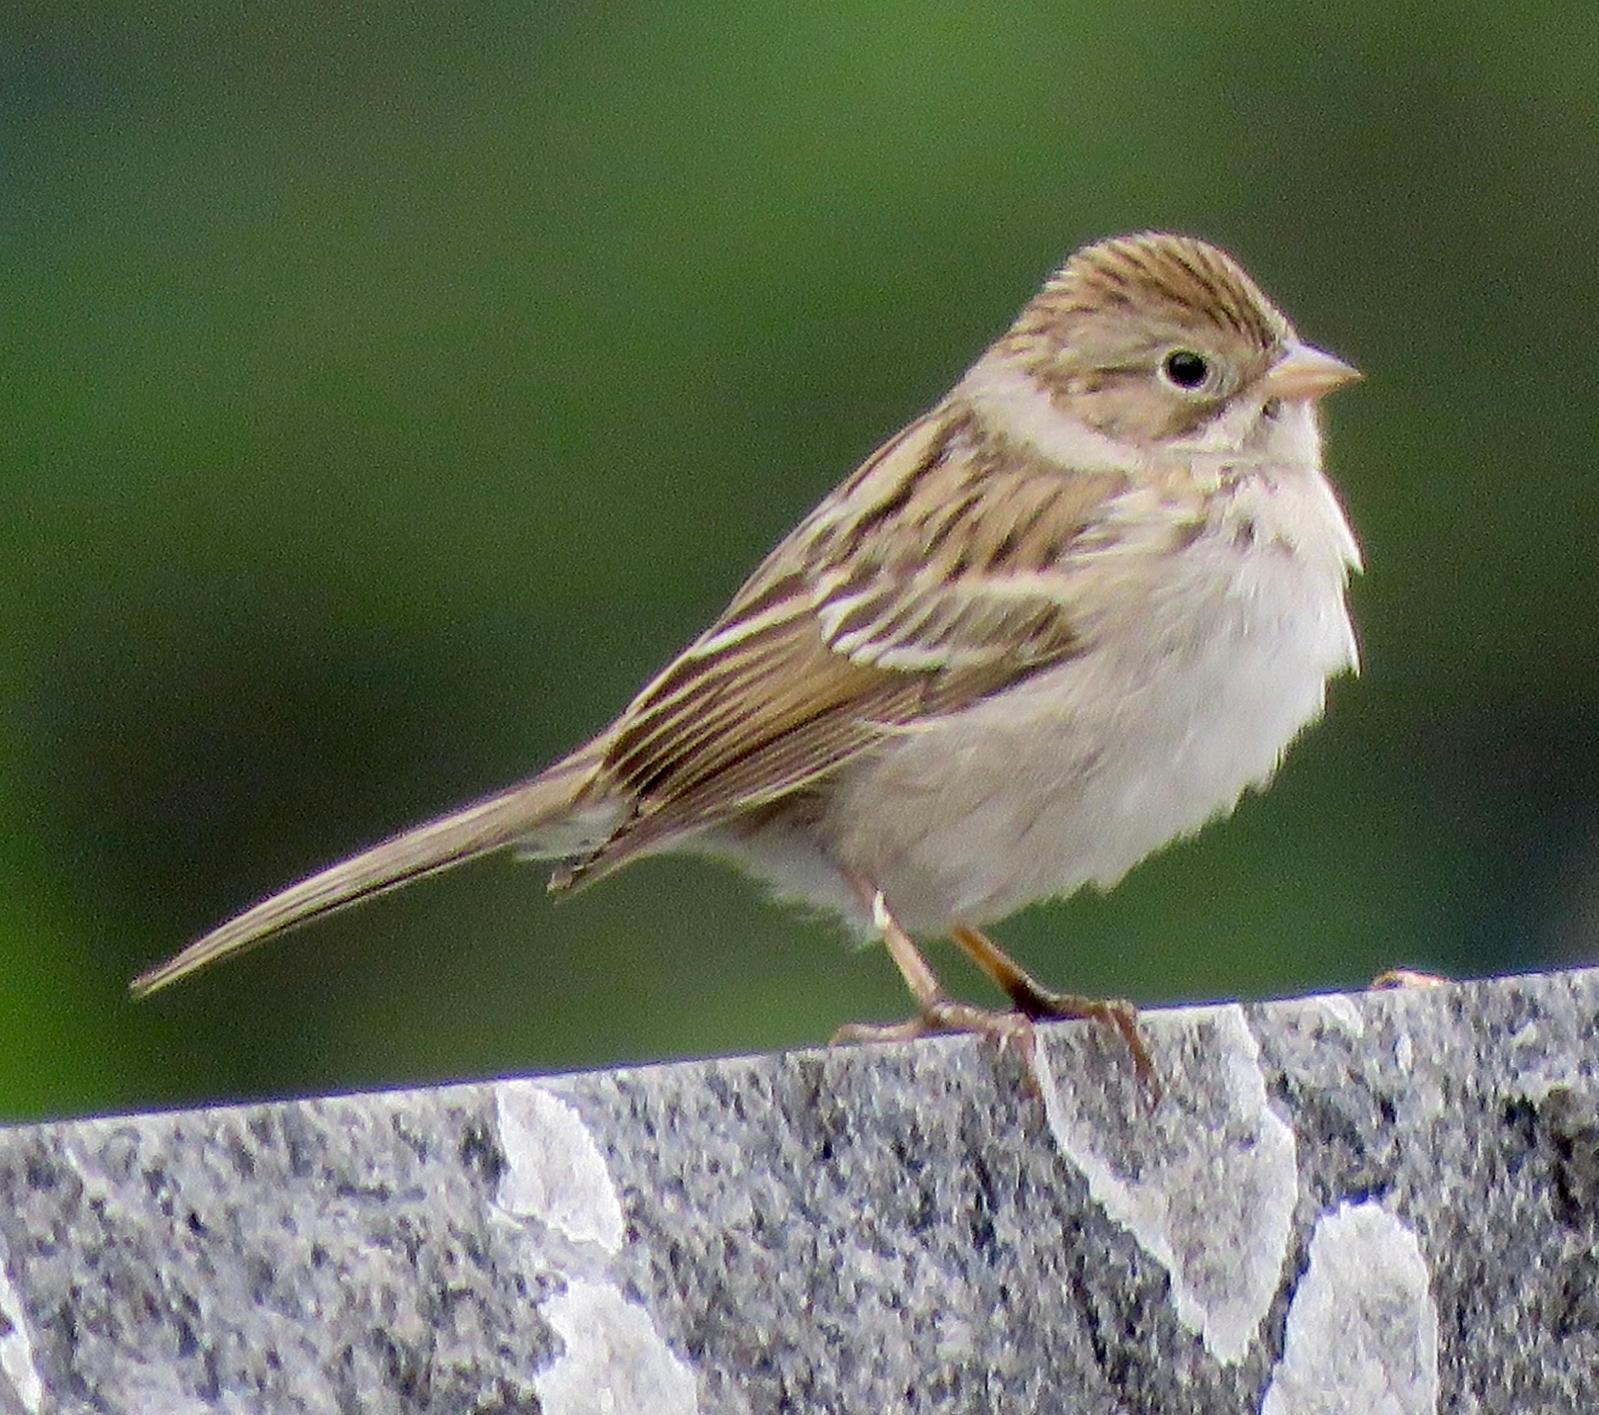 Brewer's Sparrow (Timberline) Photo by Don Glasco